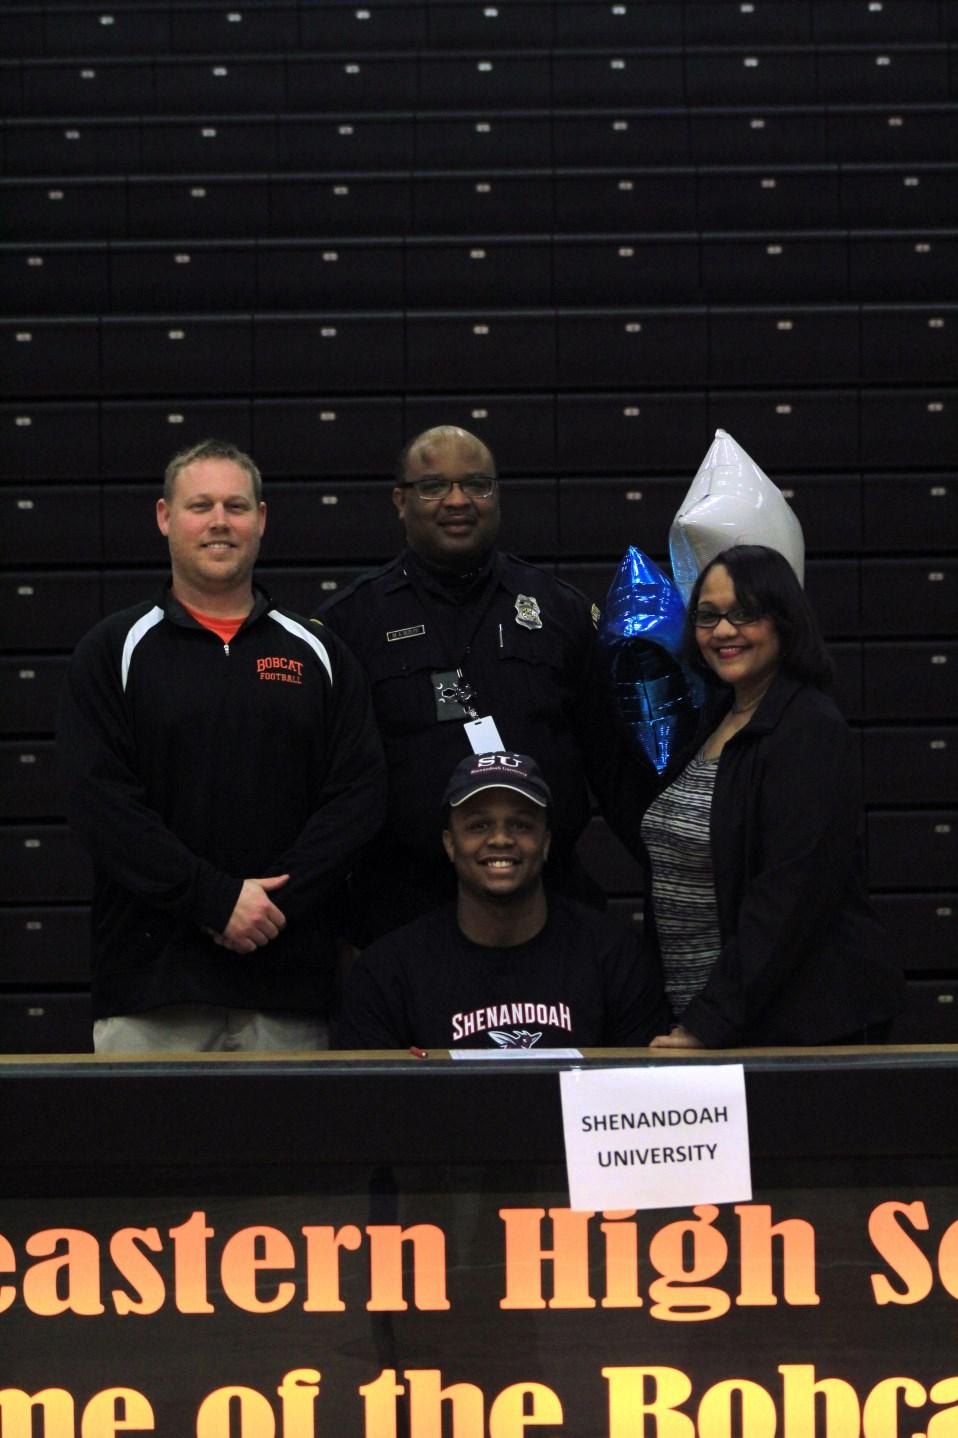 Northeastern Senior Jonathen Butler committed by signing a letter of intent to play football at Shenandoah University.